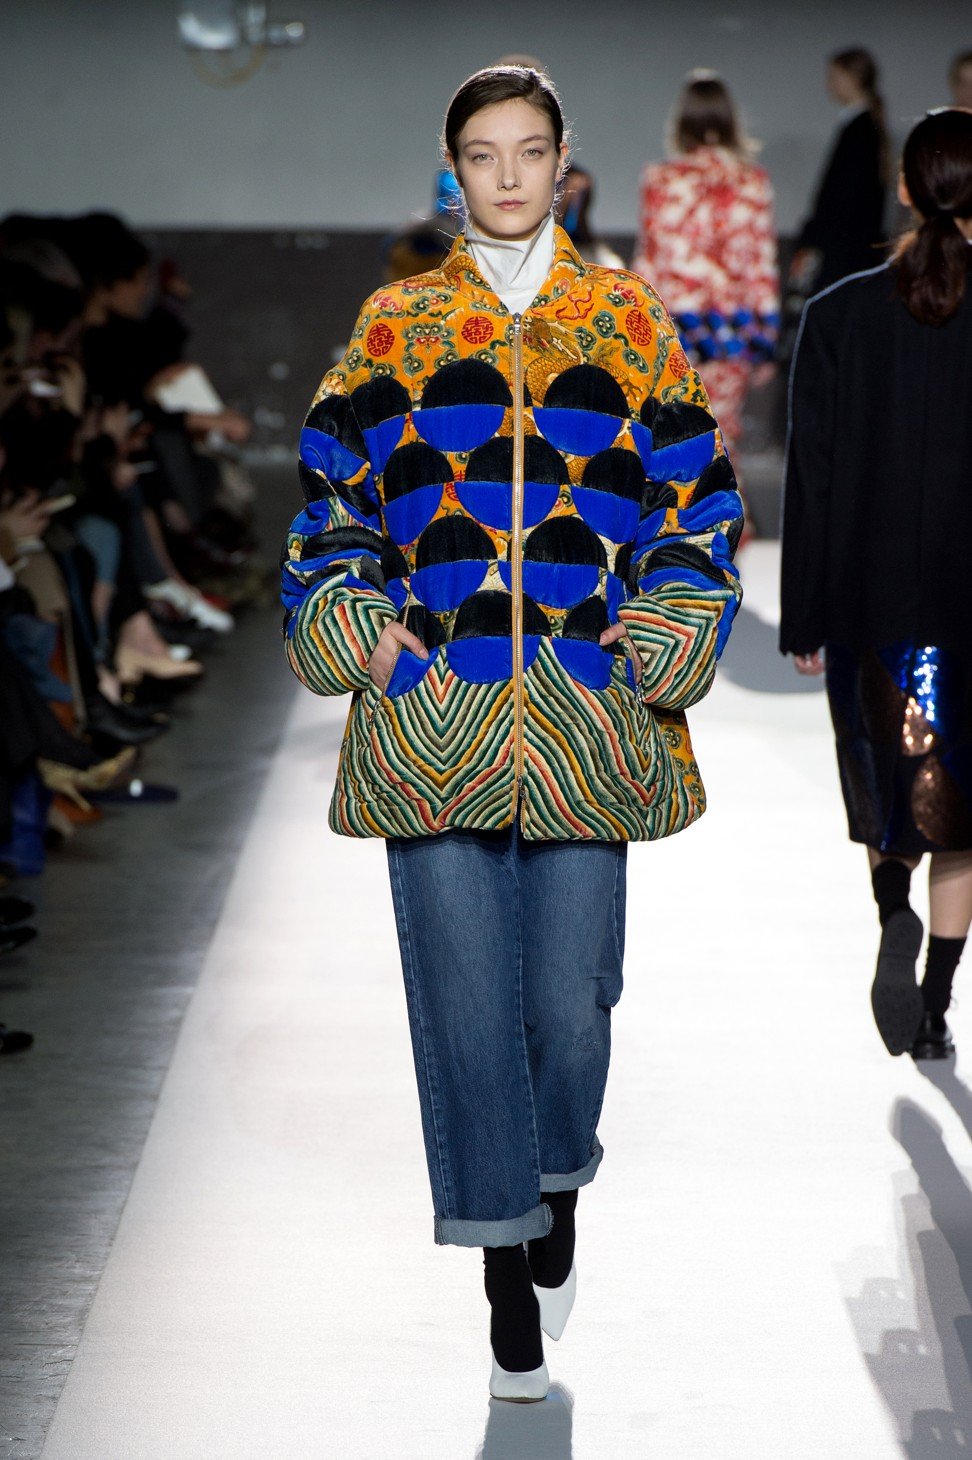 Why Dries Van Noten's 100th show pays homage to iconic 90s models